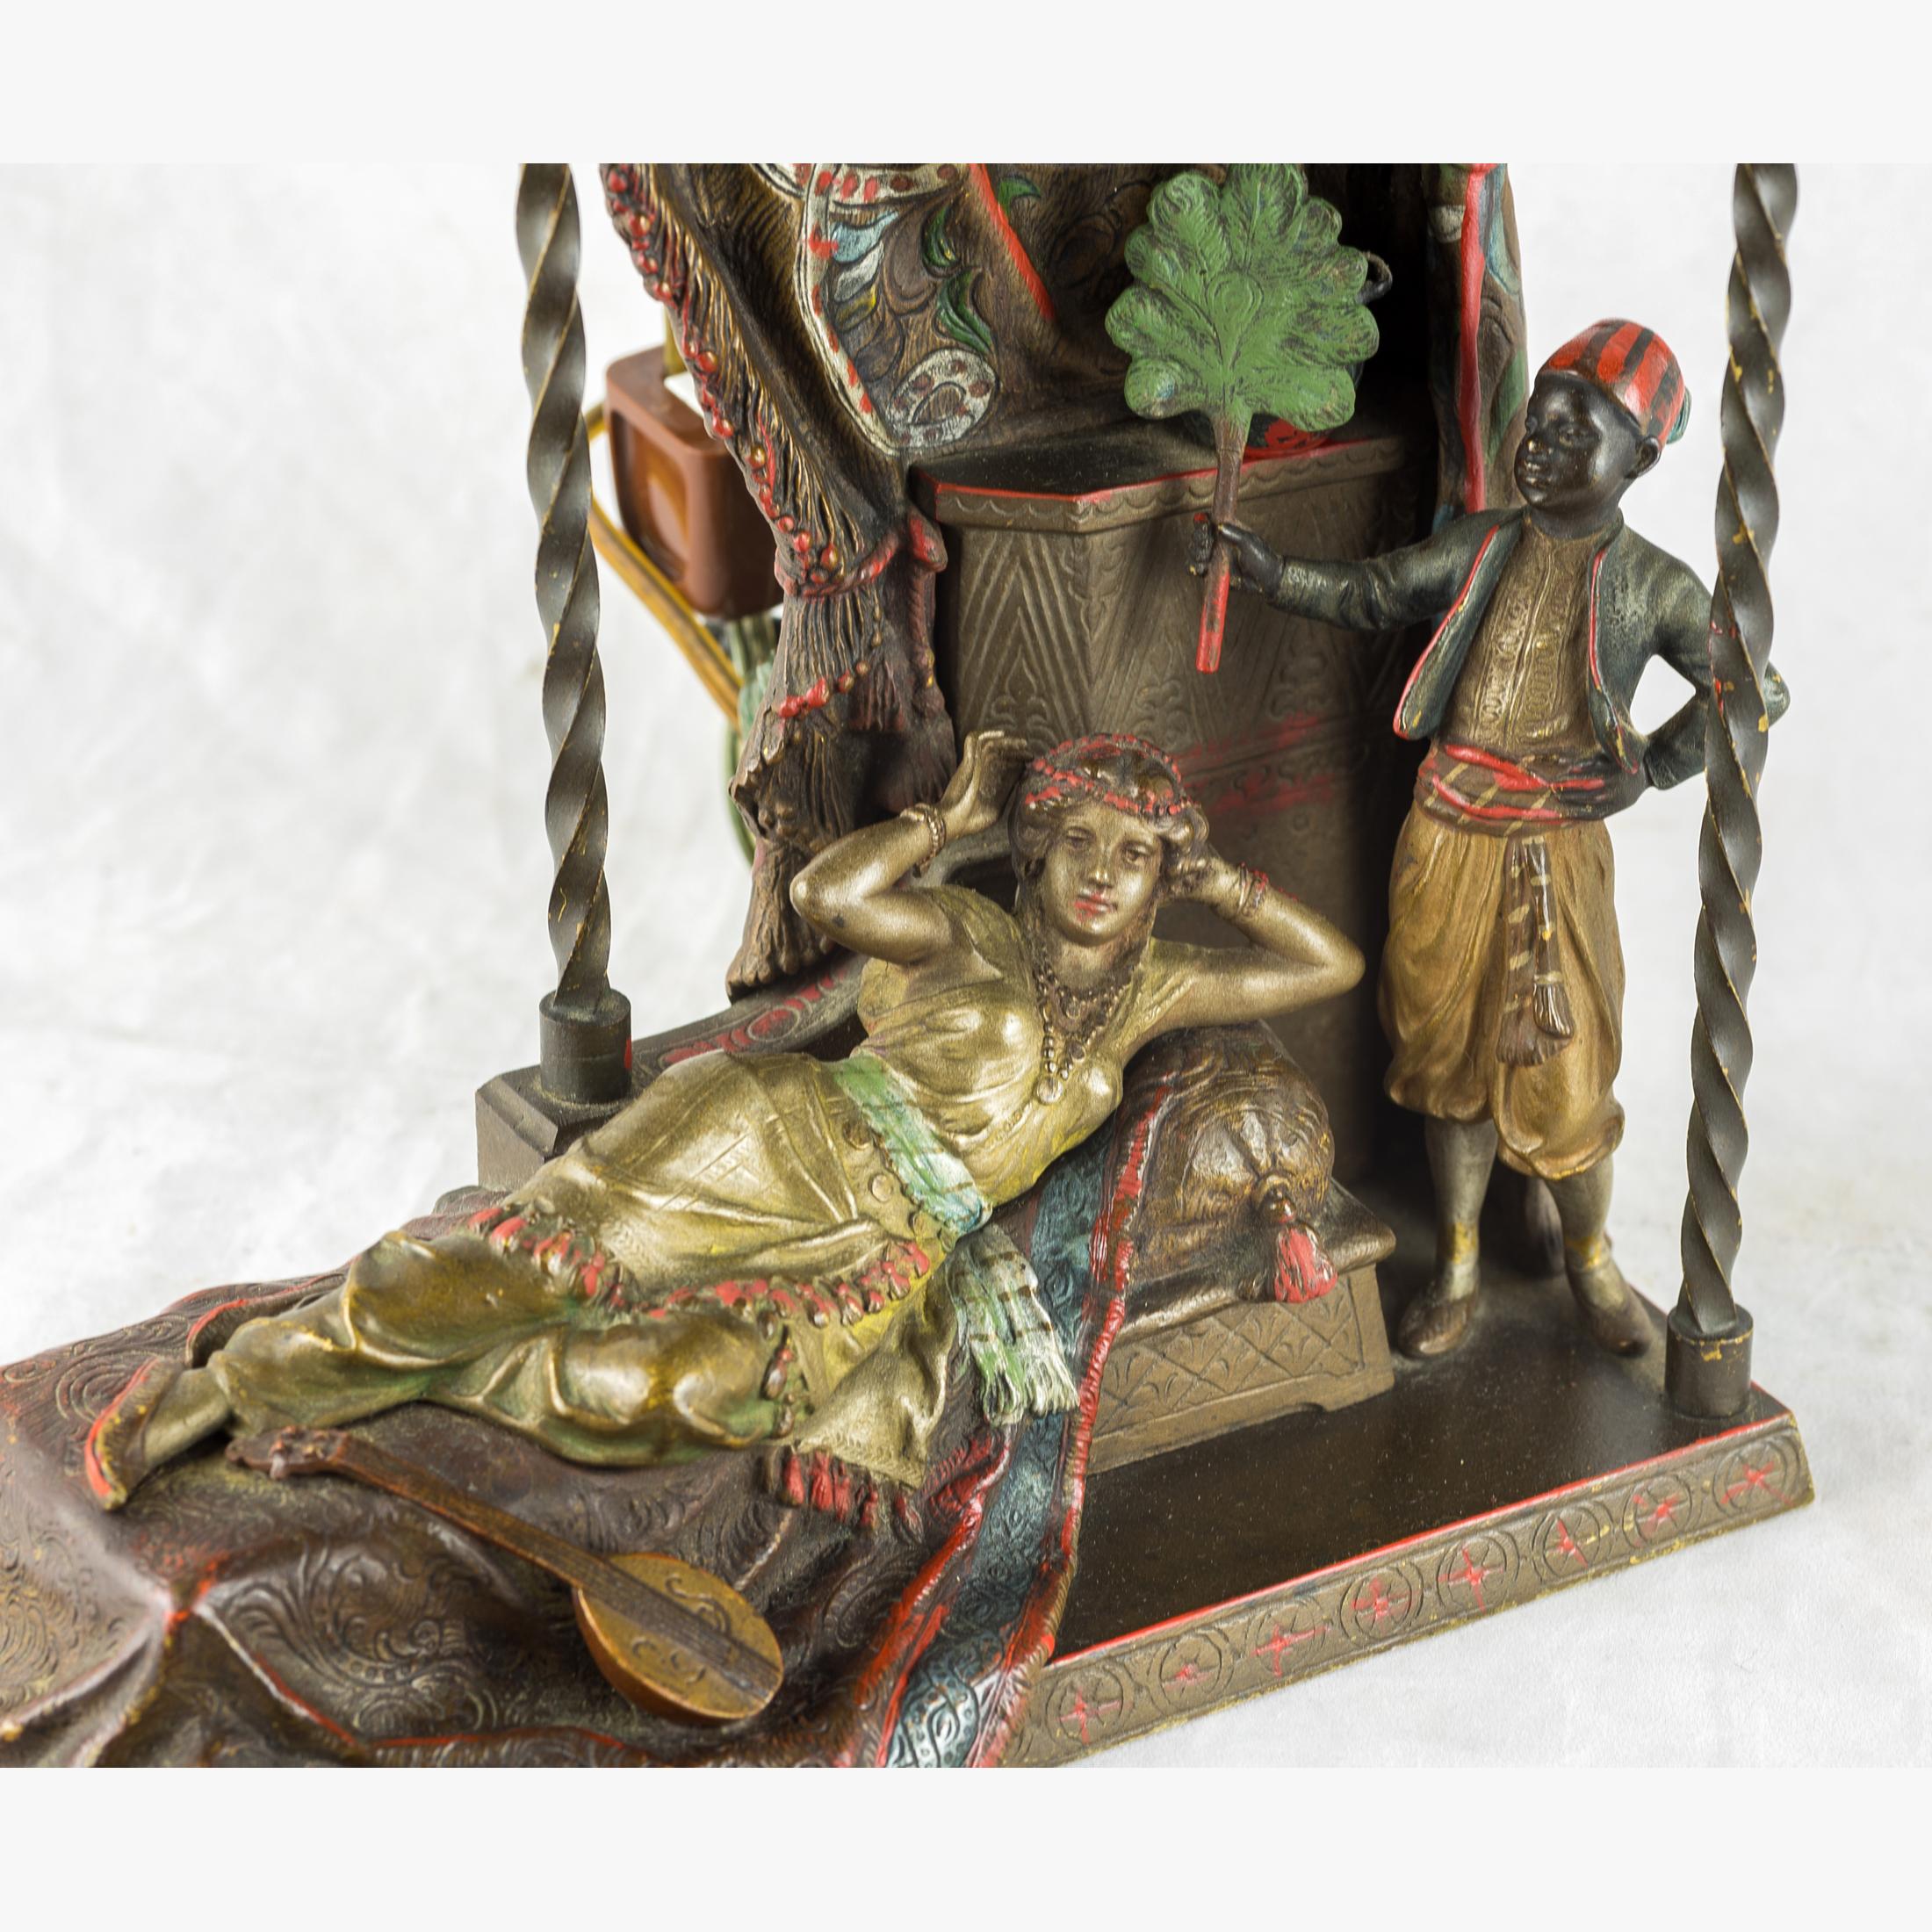 FRANZ BERGMANN
Austrian, (1861-1936)

A Lounging Concubine       

depicting a reclining woman being fanned by her servant. Inscribed ‘Nam Greb’ with foundry mark.
17 inches high
